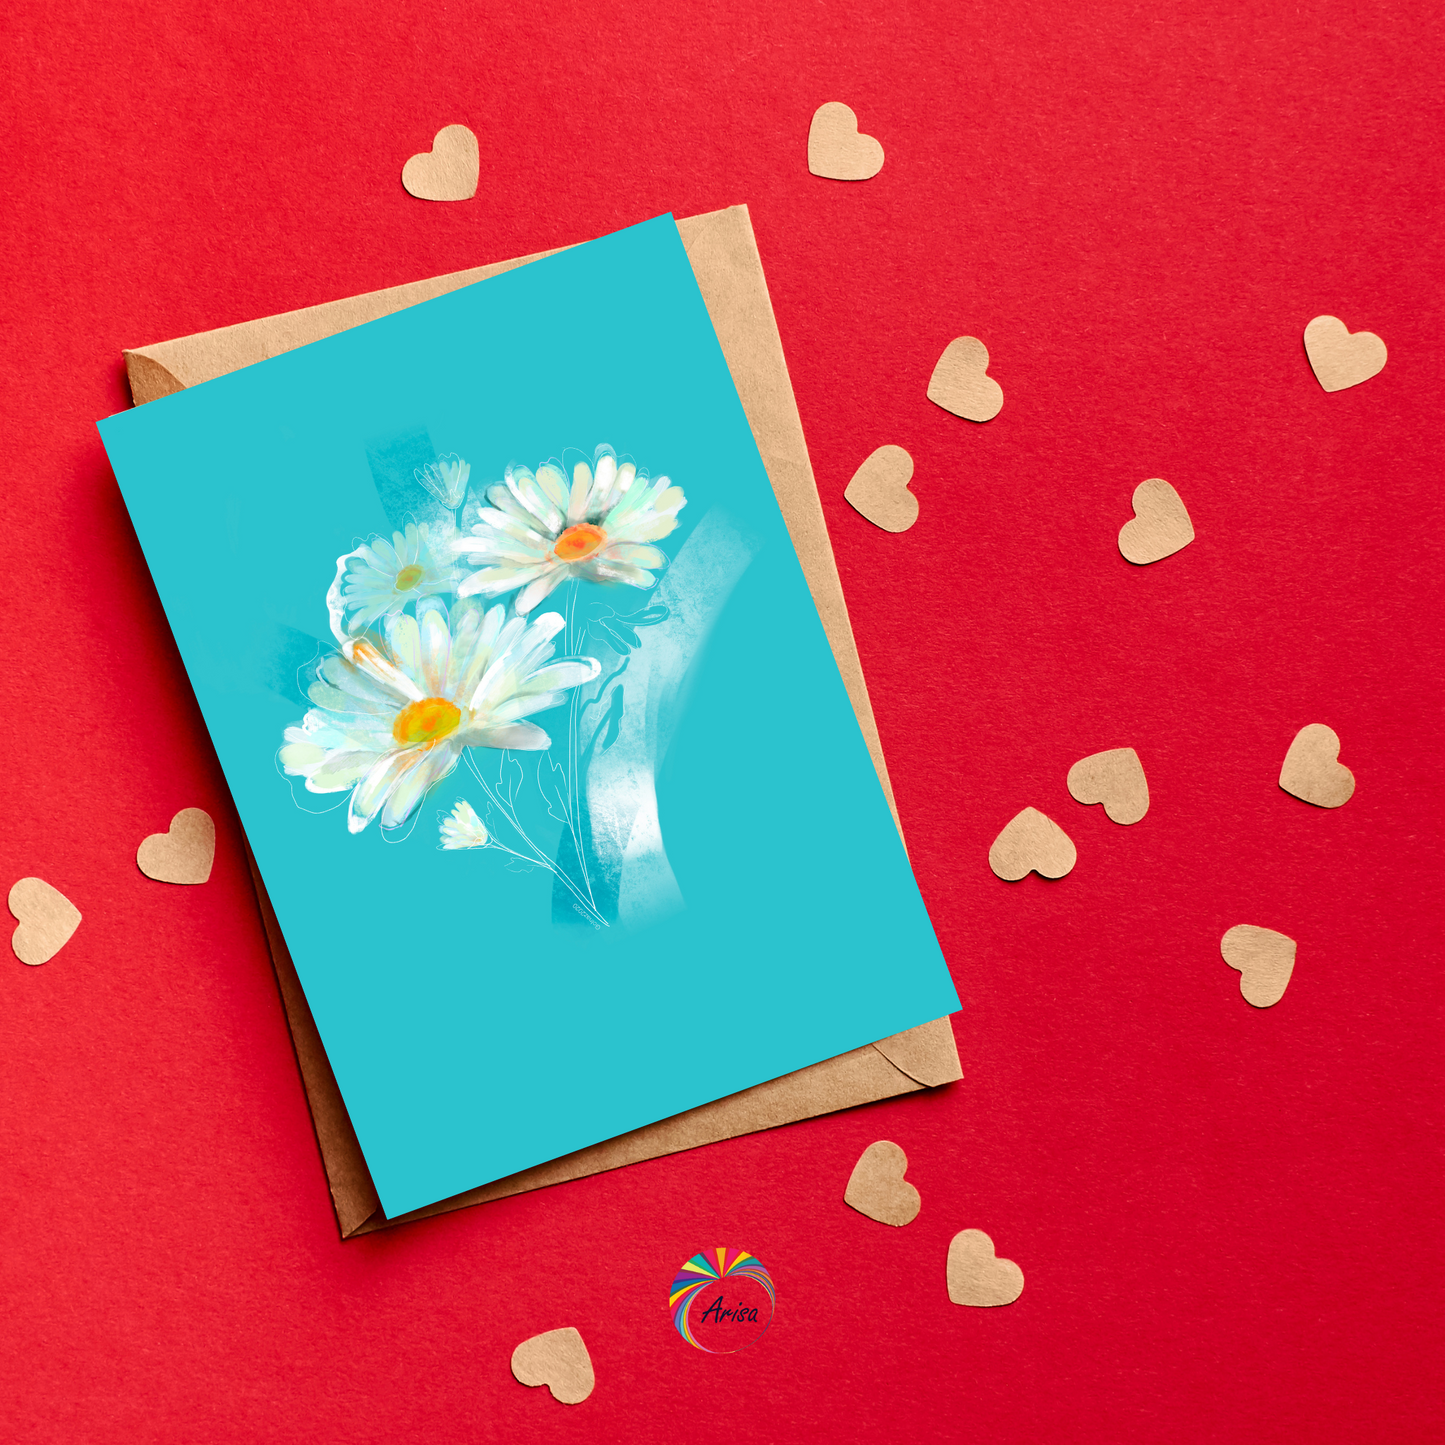 "DAISY" Greeting Card by ArisaTeam surrounded by small hearts in a red background ideal as a Valentine card.